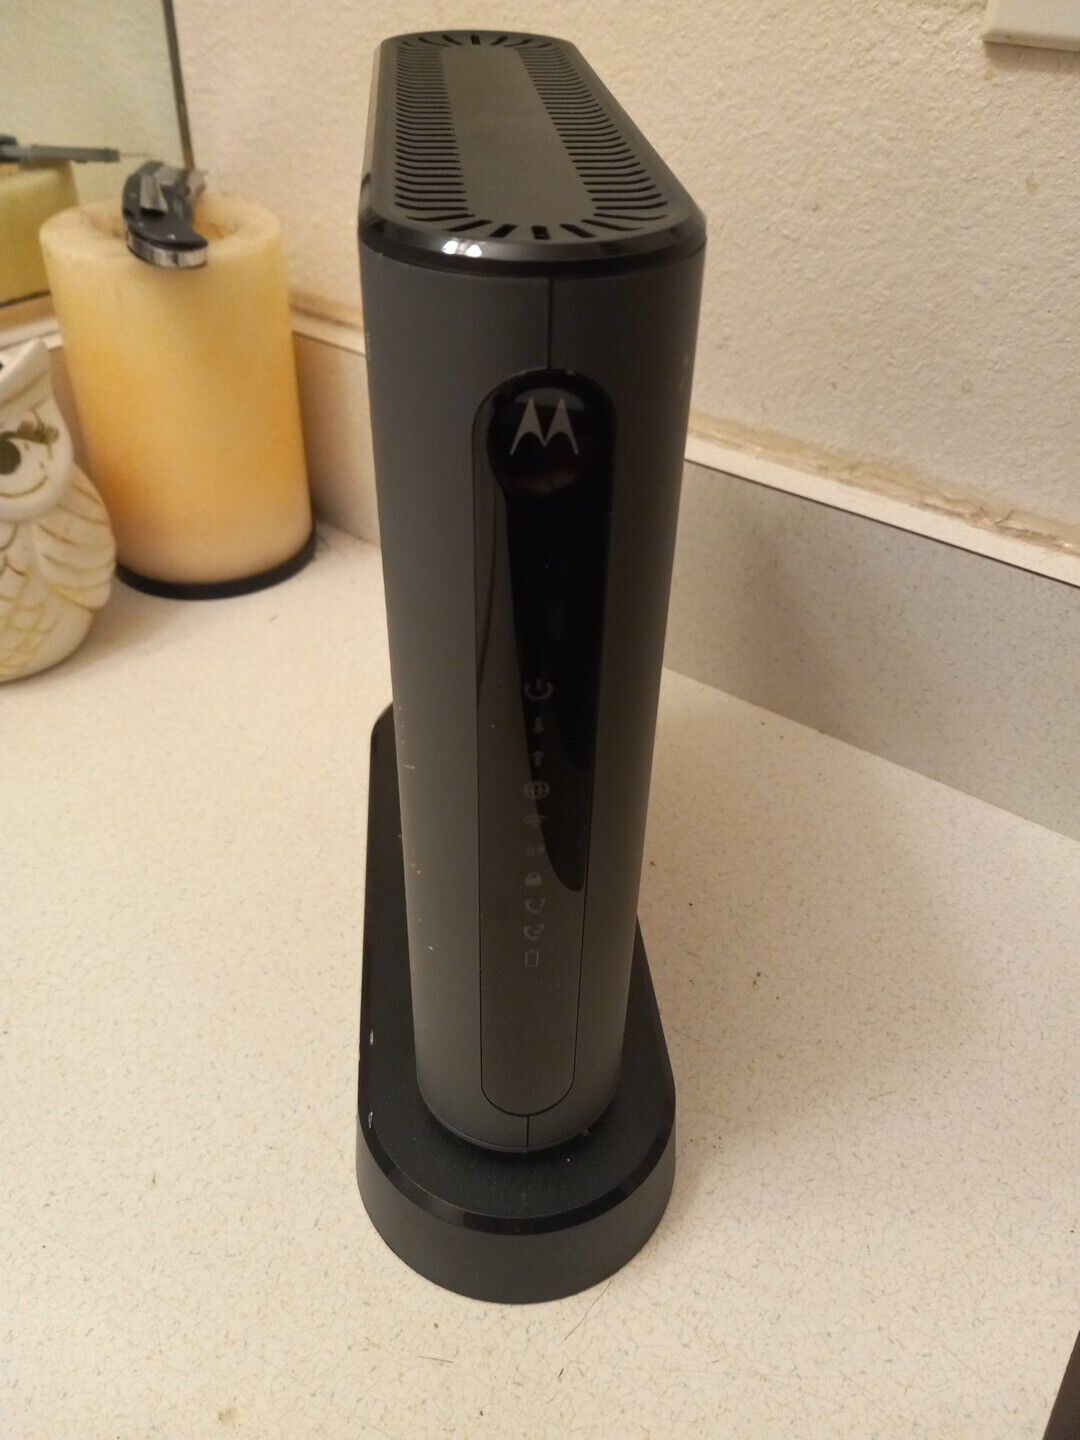 Motorola MT7711 Dual Band AC1900 Cable Modem and Wi-Fi Gigabit Router Only